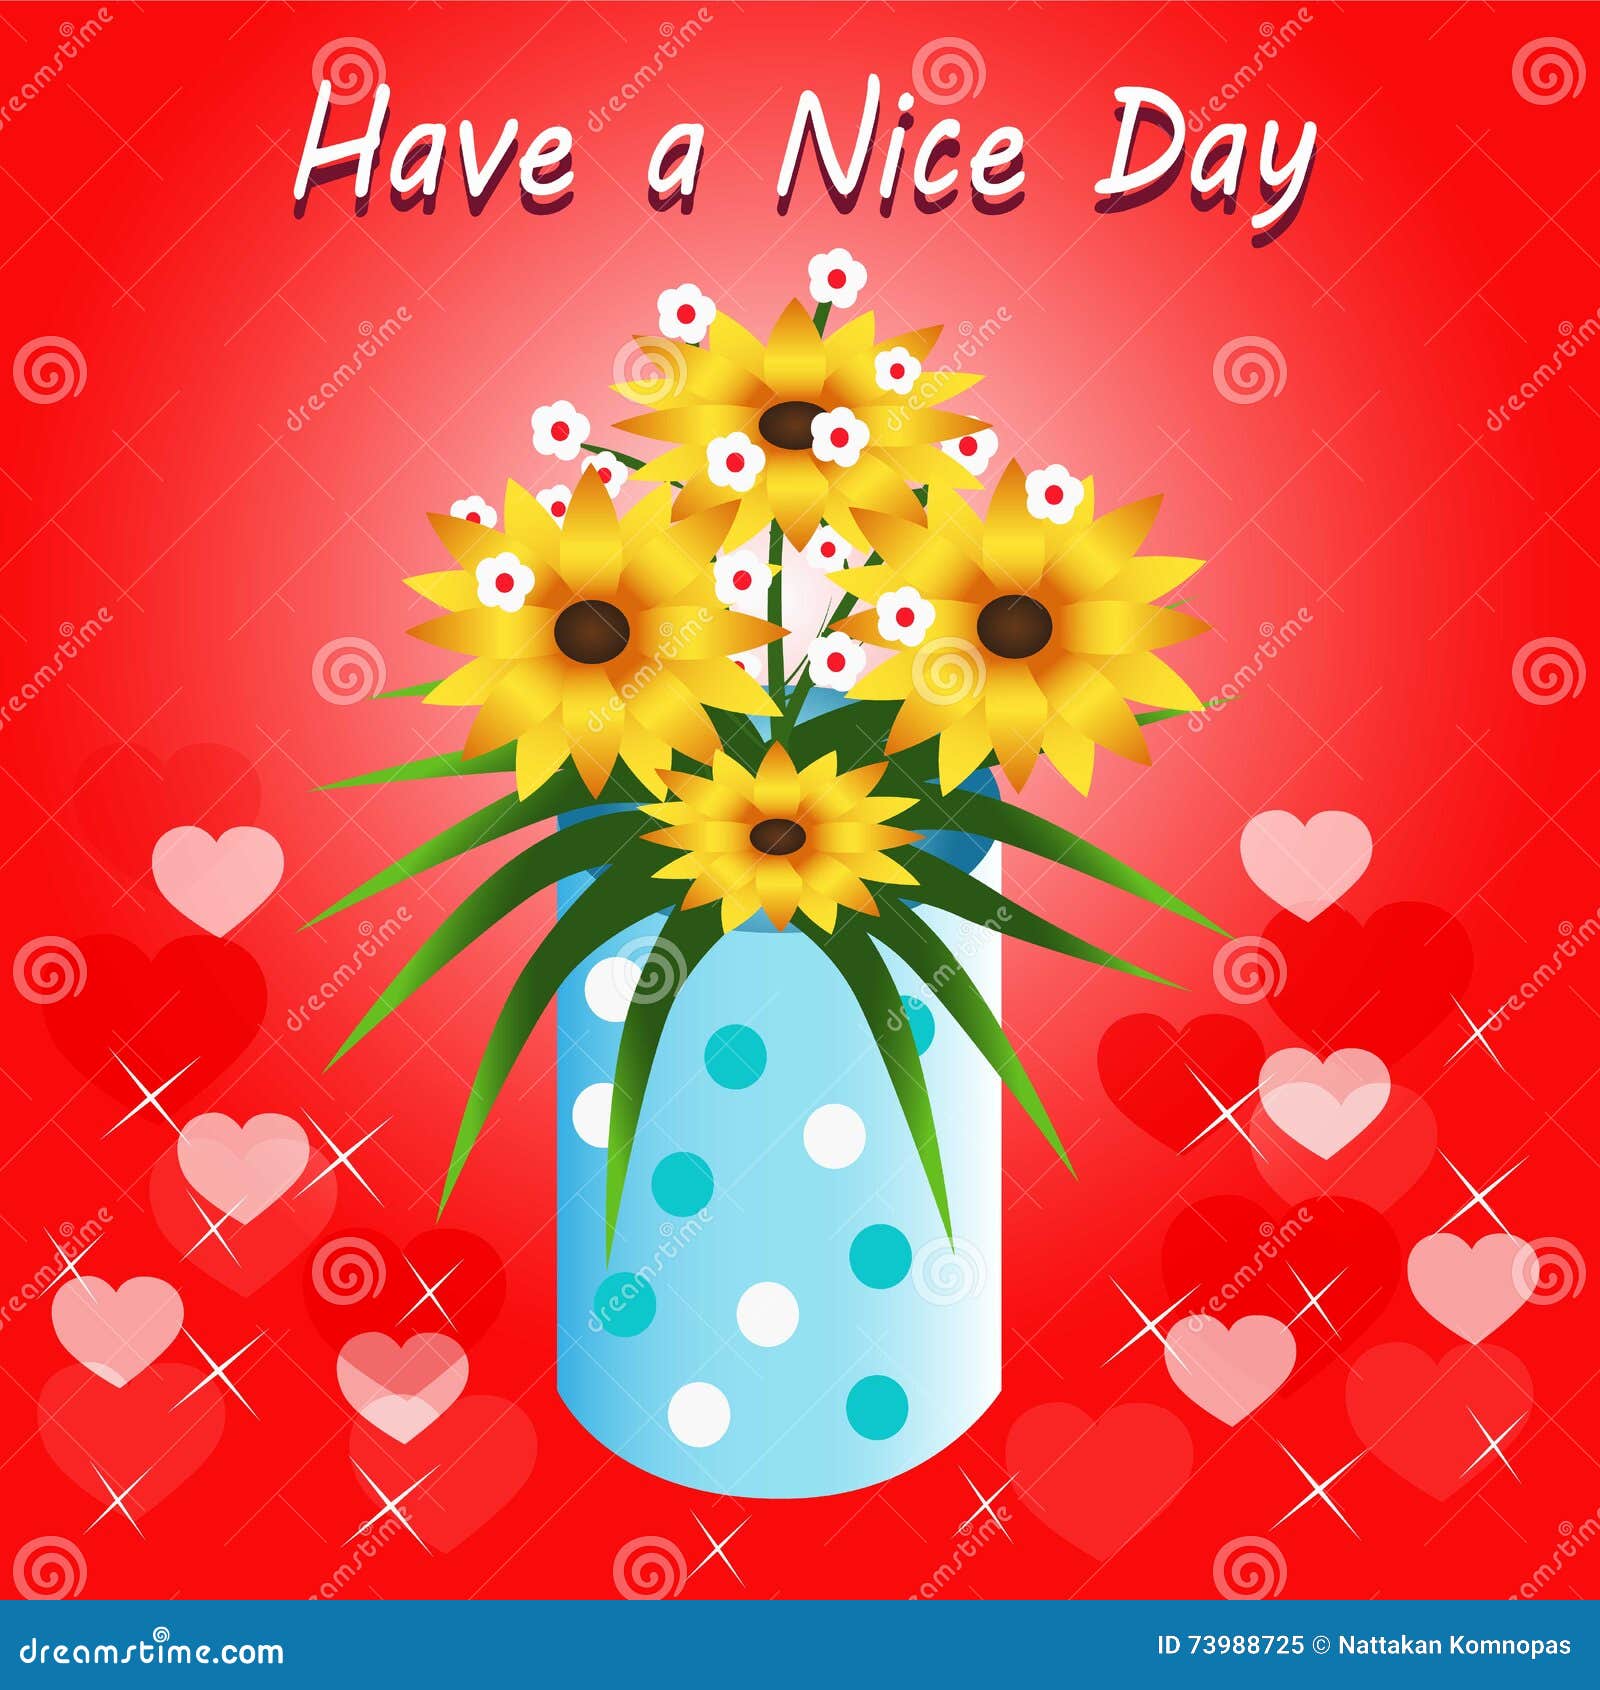 Have a nice day stock illustration. Illustration of good - 73988725